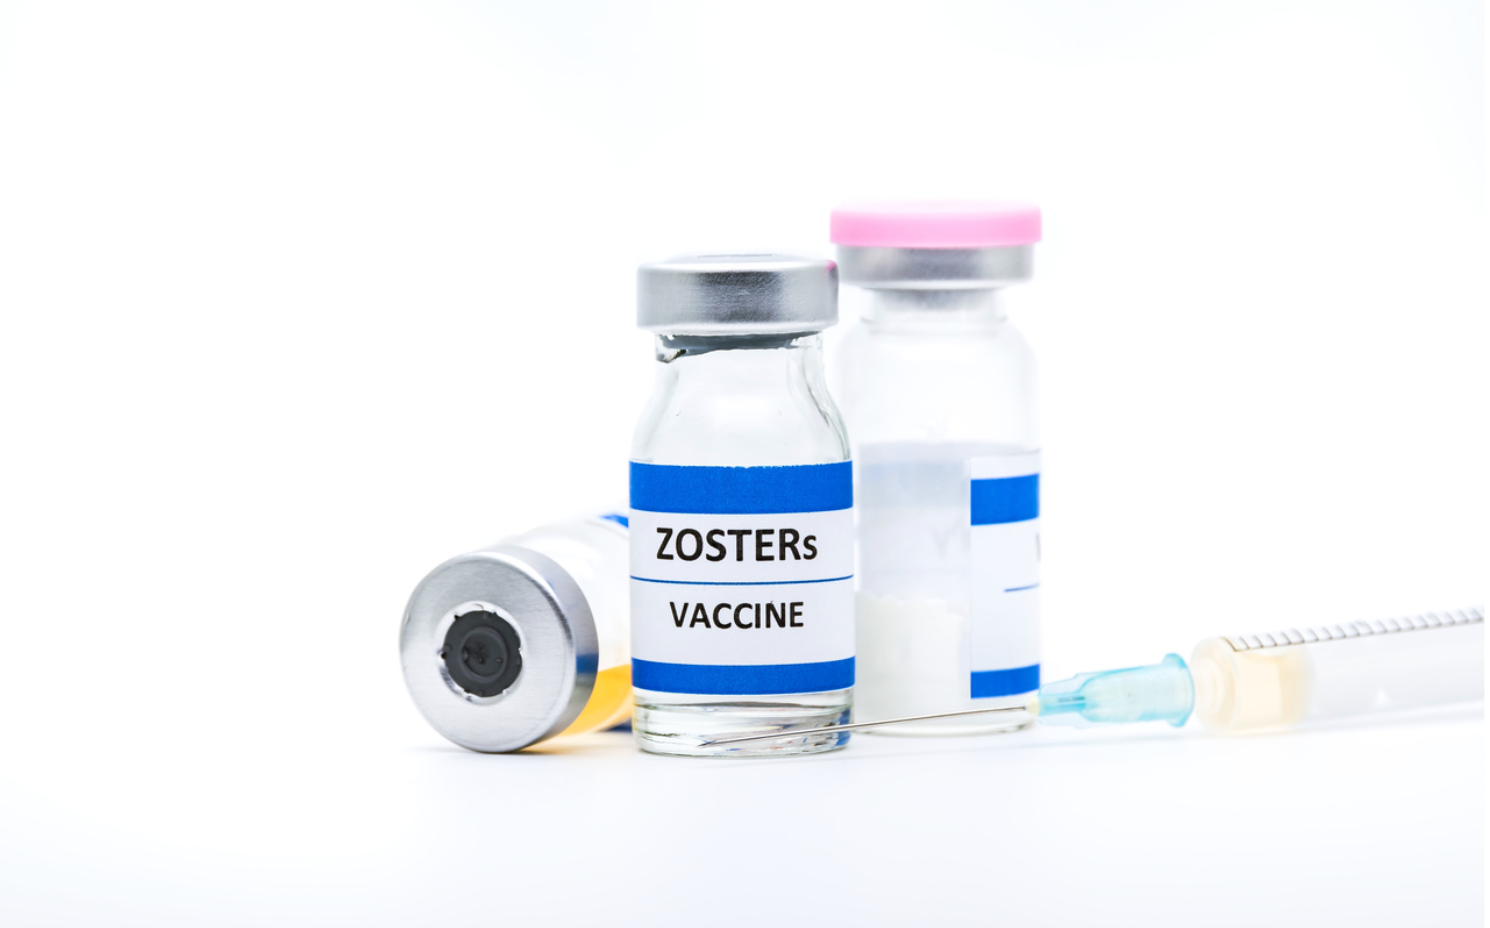 Study: General Practitioners Lack Understanding of Zoster Vaccine Risks, Guidelines for Immunocompromised Patients 